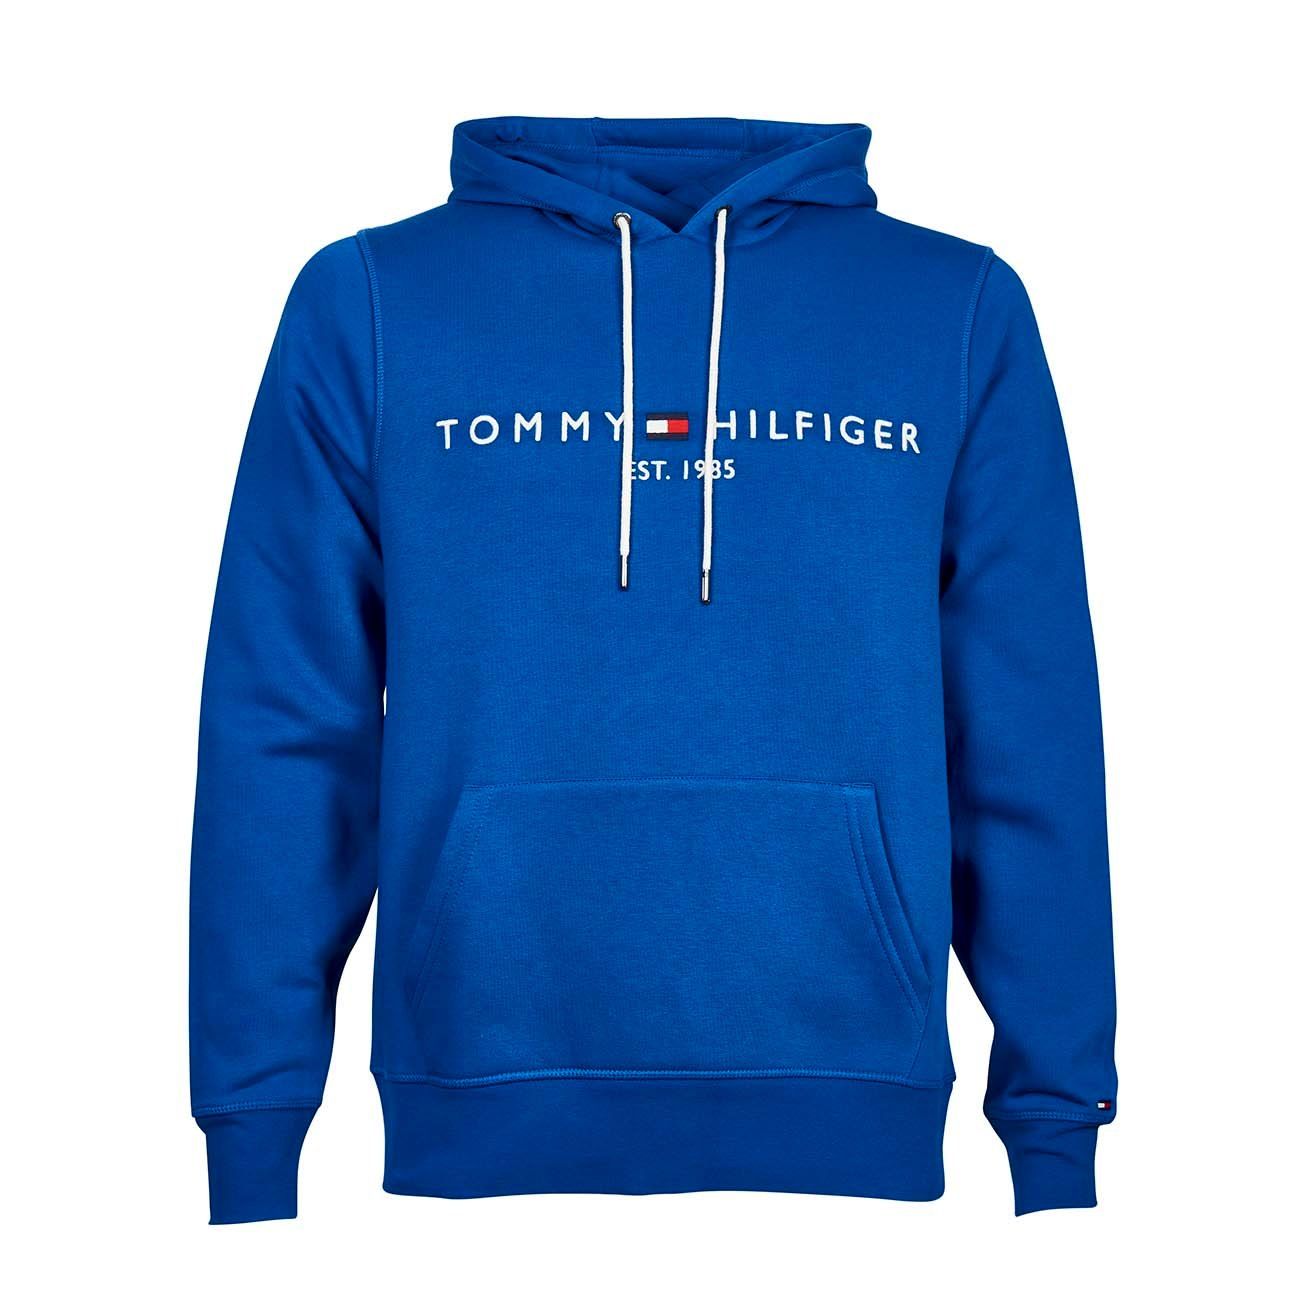 TOMMY HILFIGER HOODIE WITH EMBROIDERED 